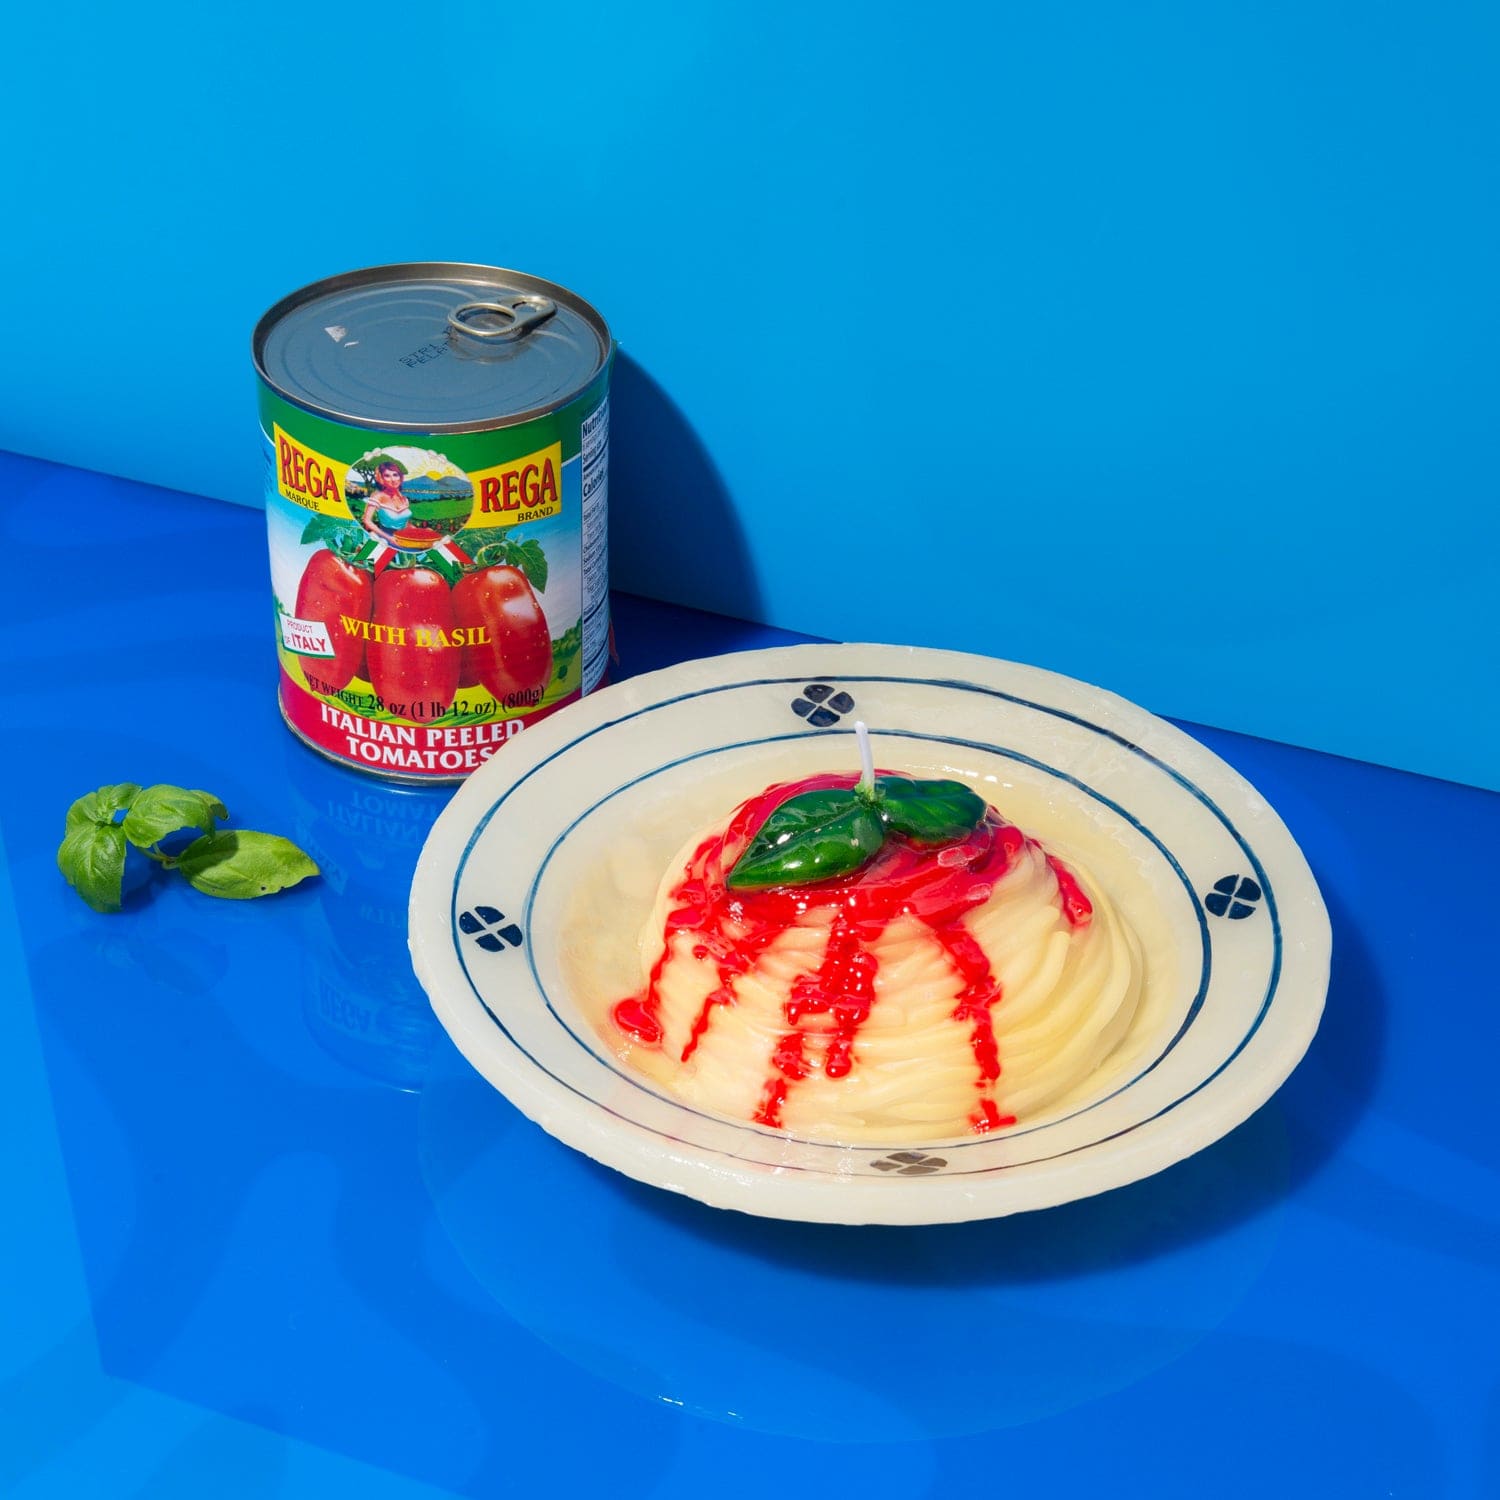 Spaghetti Candle Candle - Candles - Crazy - Food - Novelty